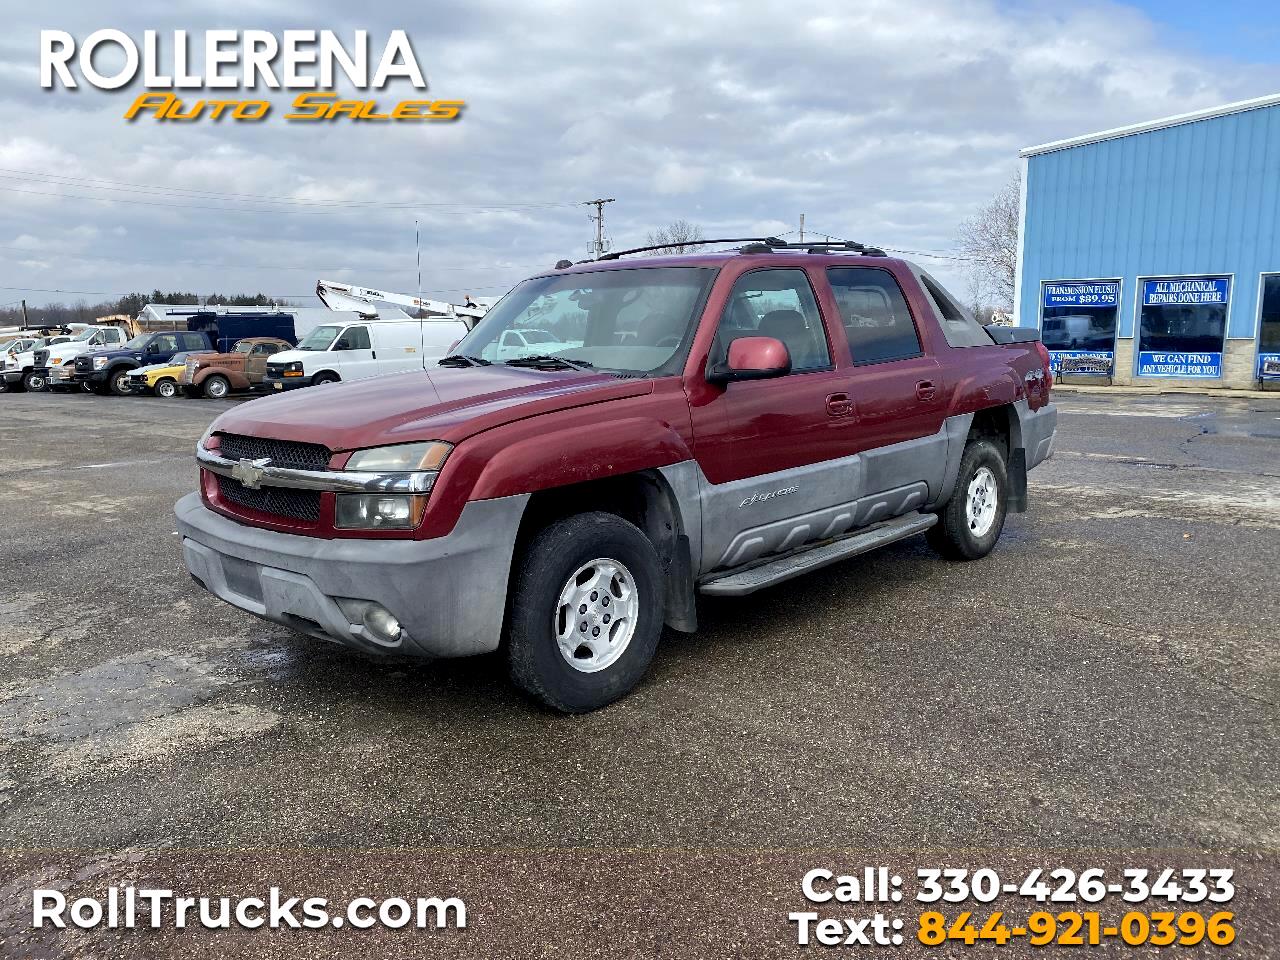 Chevrolet Avalanche 1500 5dr Crew Cab 130" WB 4WD 2004